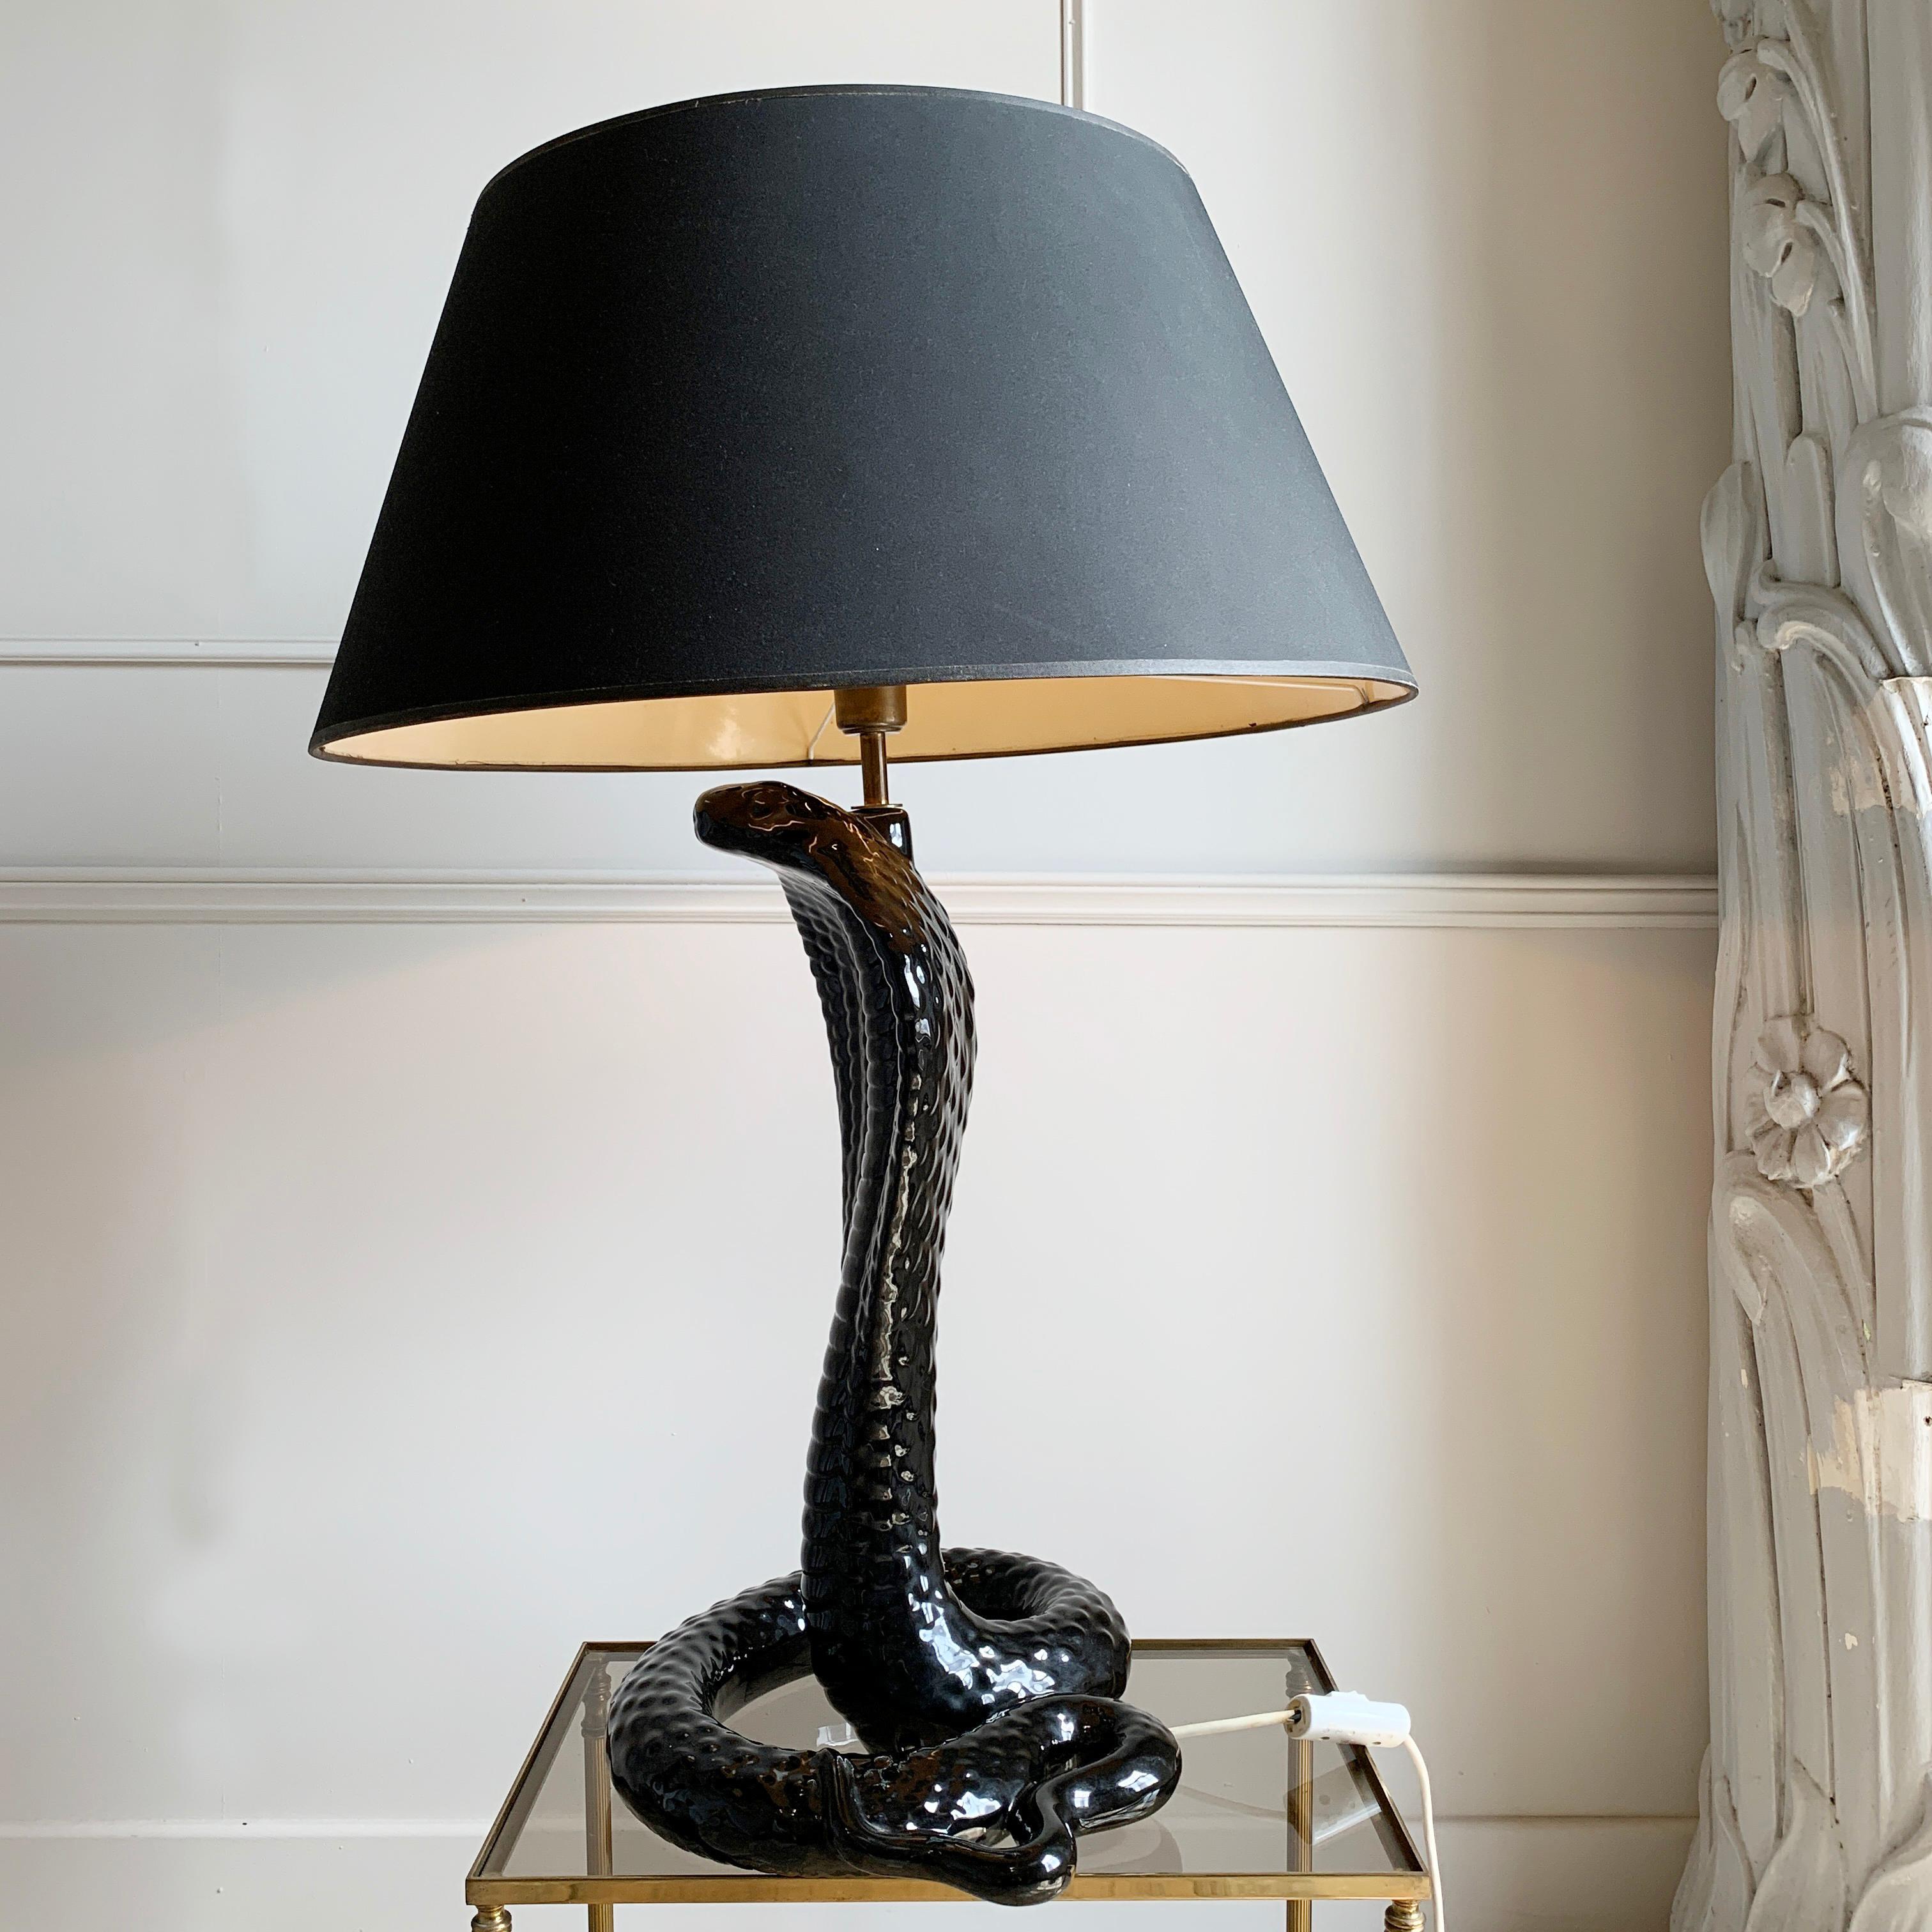 An exceptionally rare Tommaso Barbi Ceramic Cobra lamp, in black. This colourway is the rarest of all of the Barbi Cobra's and very rarely come to market. This piece is in excellent condition, and still has it's original black lamp shade.

This is